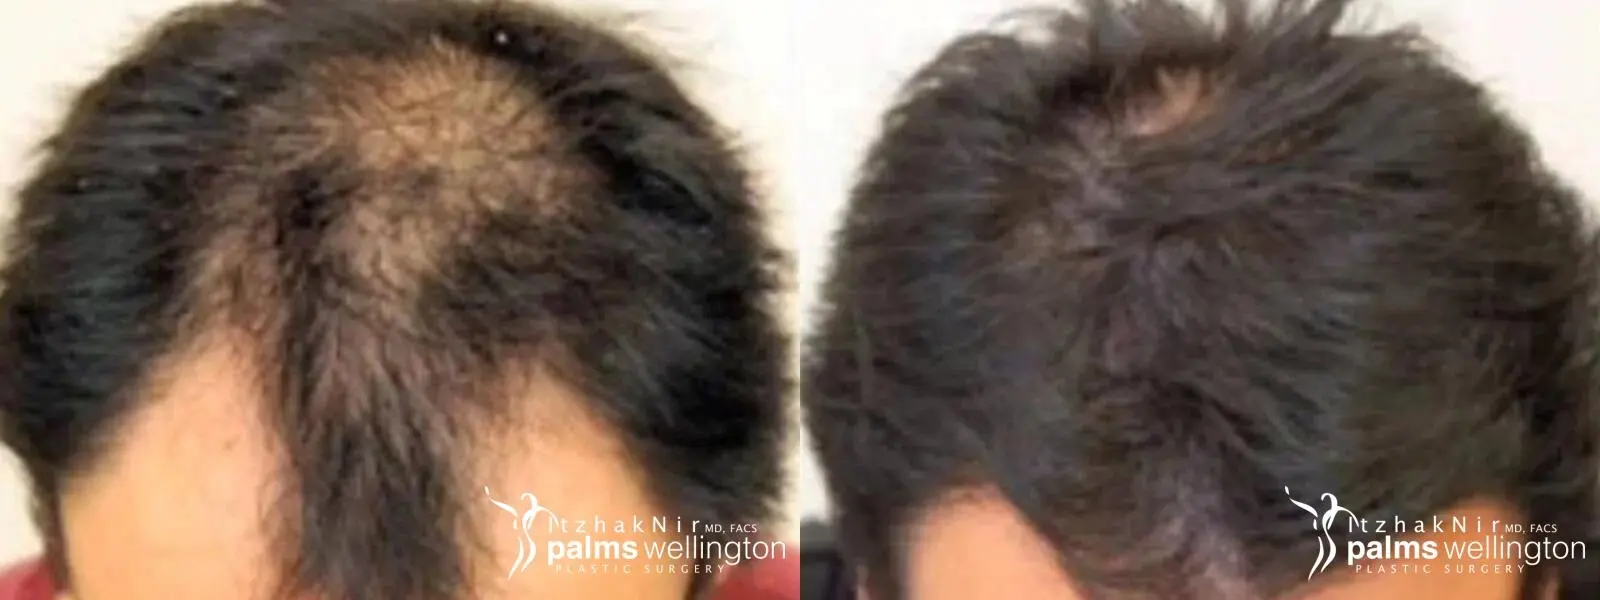 Hair Restoration | Boca Raton - Before and After